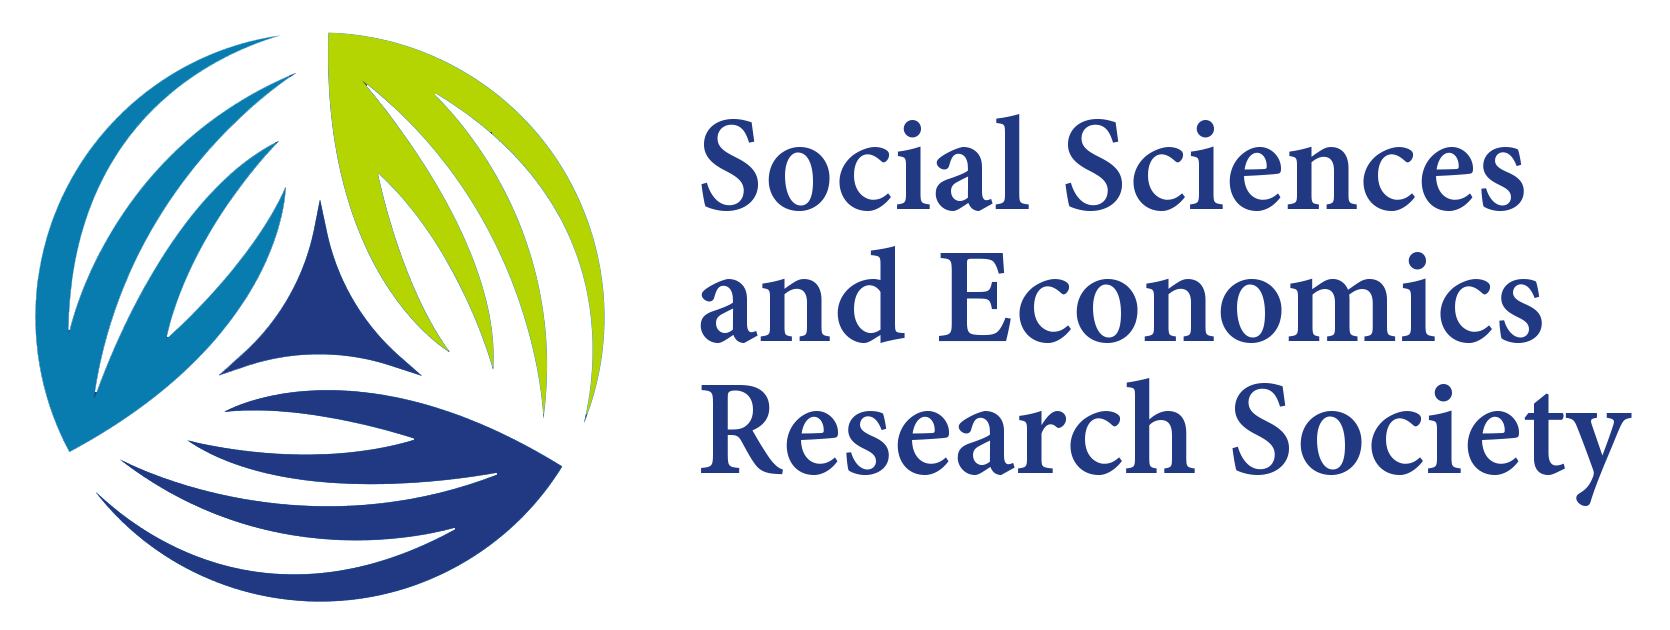 SSERS 3rd International Conference on  Advanced Research in Business Management, Social Sciences, Humanities, Economics & Law